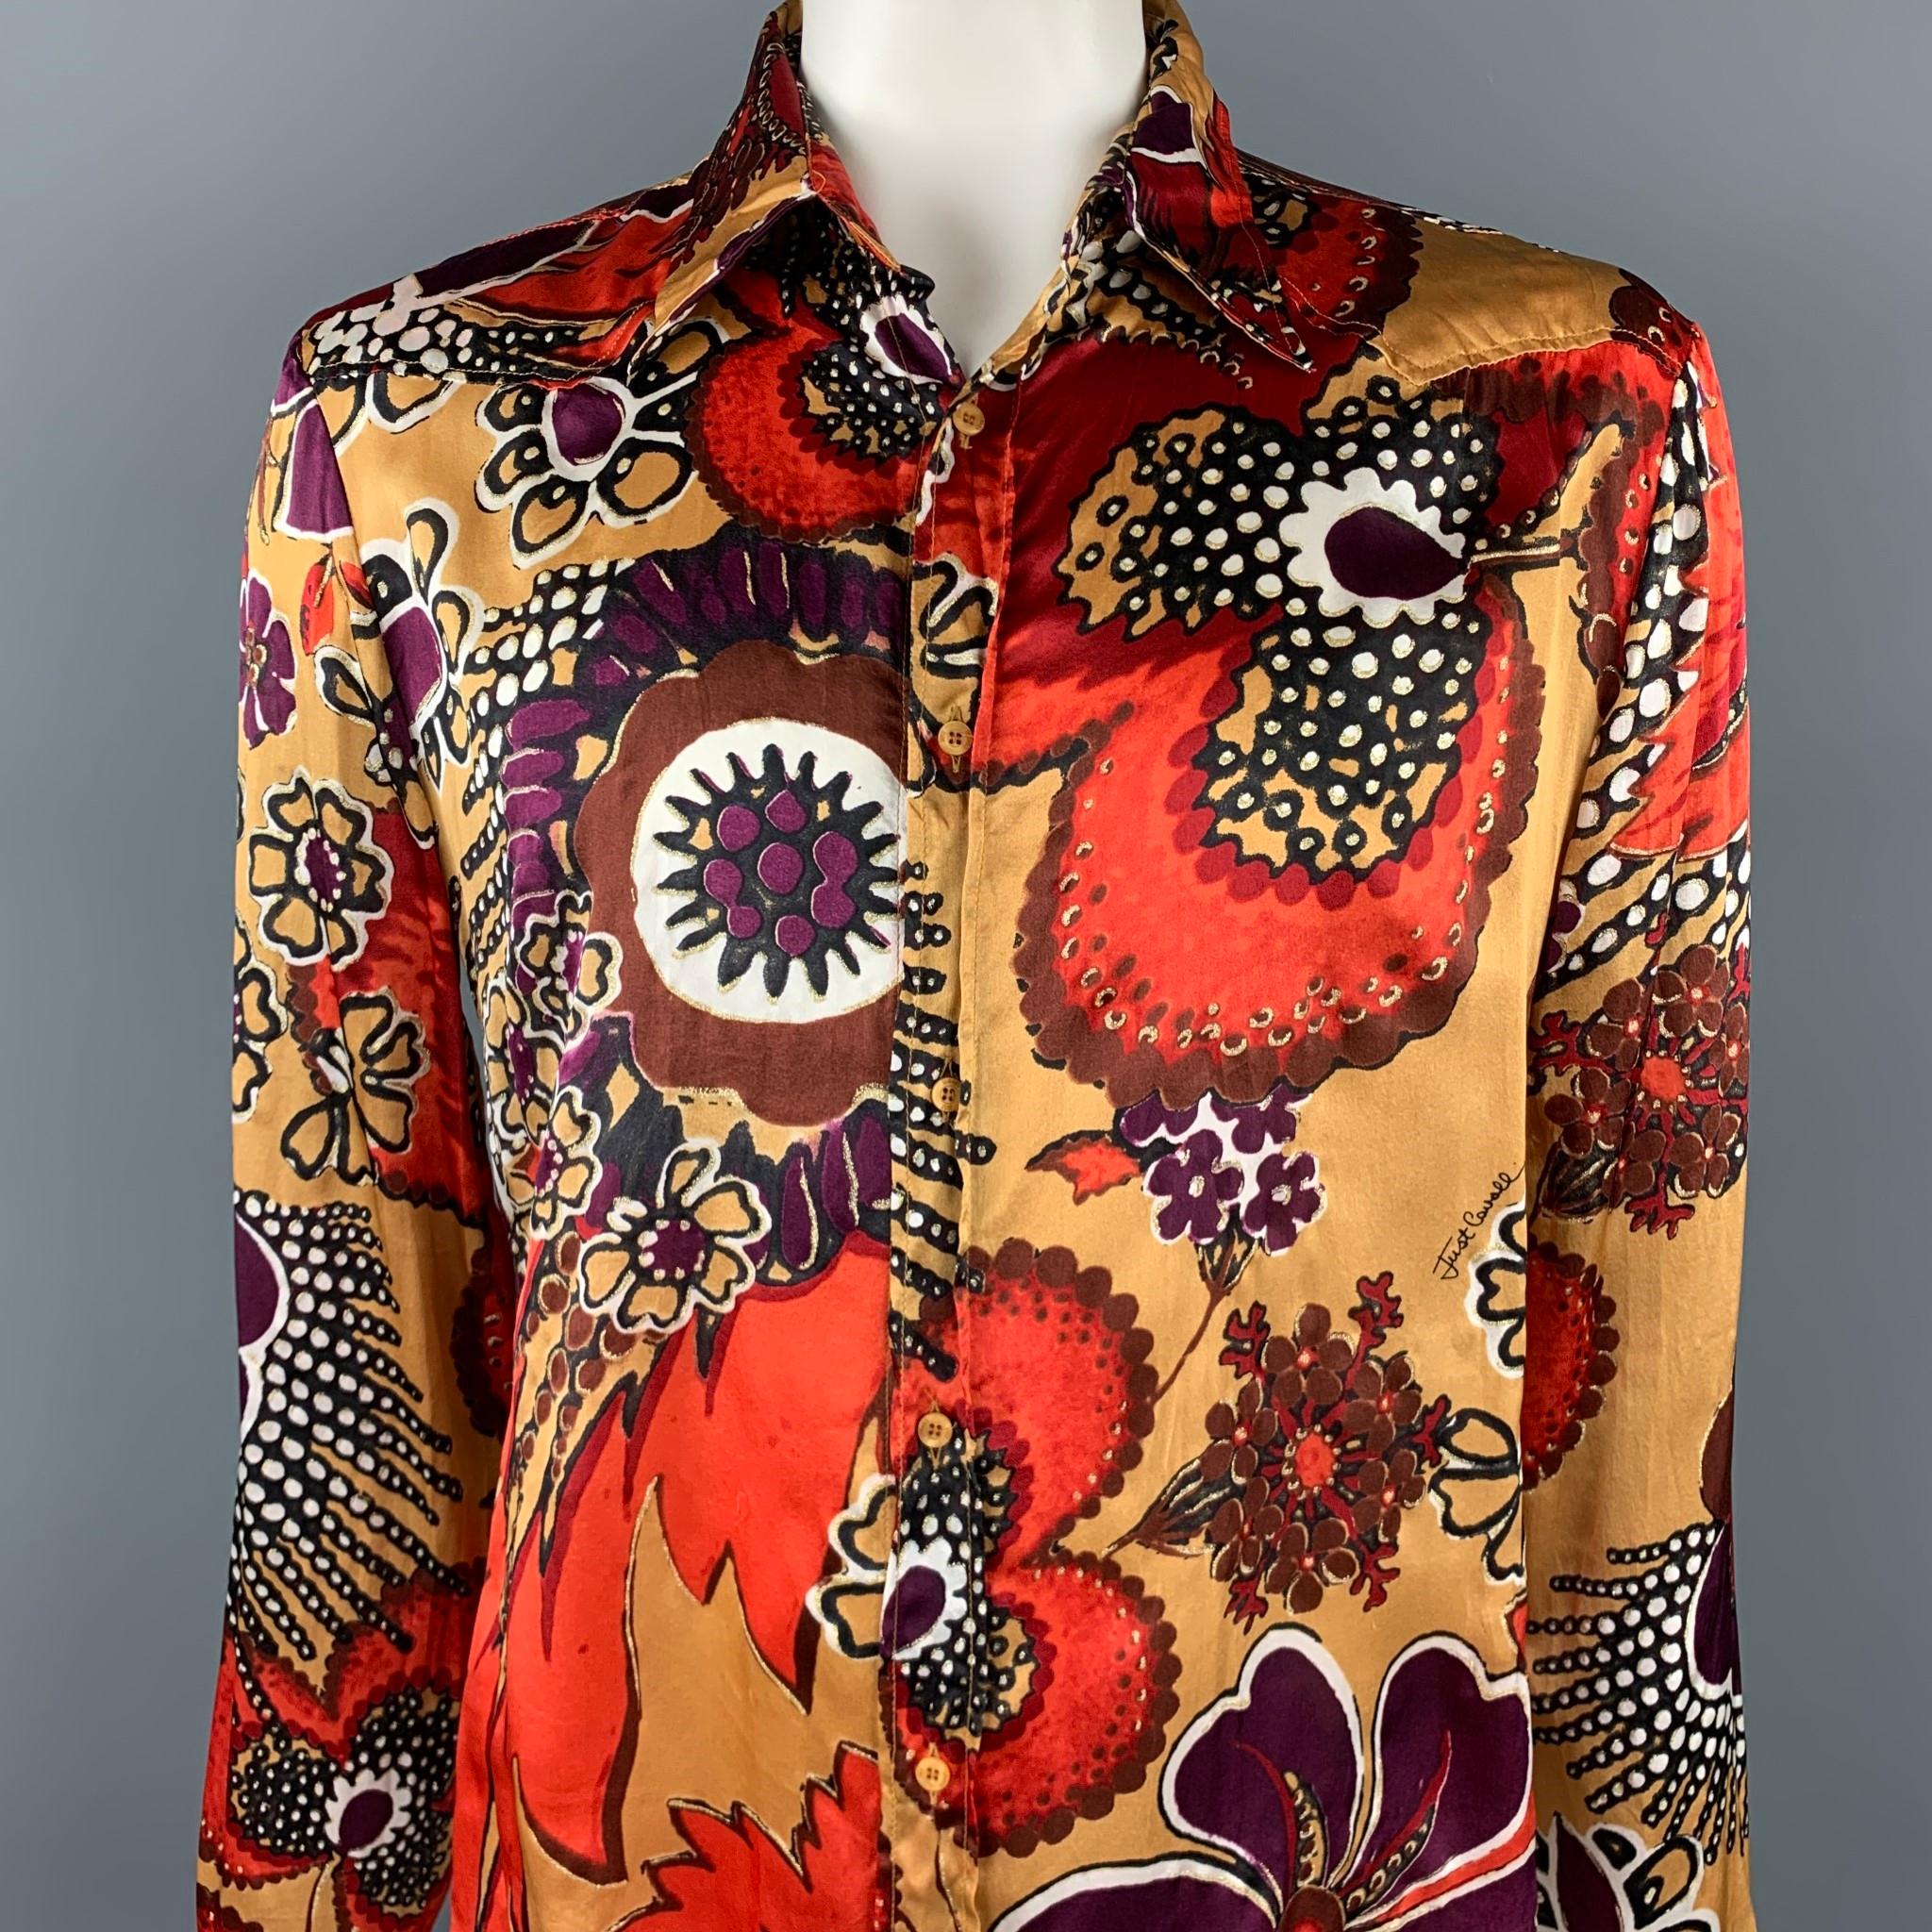 JUST CAVALLI long sleeve shirt comes in a gold & brown floral silk with metallic details featuring a button up style and a spread collar. Made in Italy.

Very Good Pre-Owned Condition.
Marked: IT 54

Measurements:

Shoulder: 20 in.
Chest: 44 in.